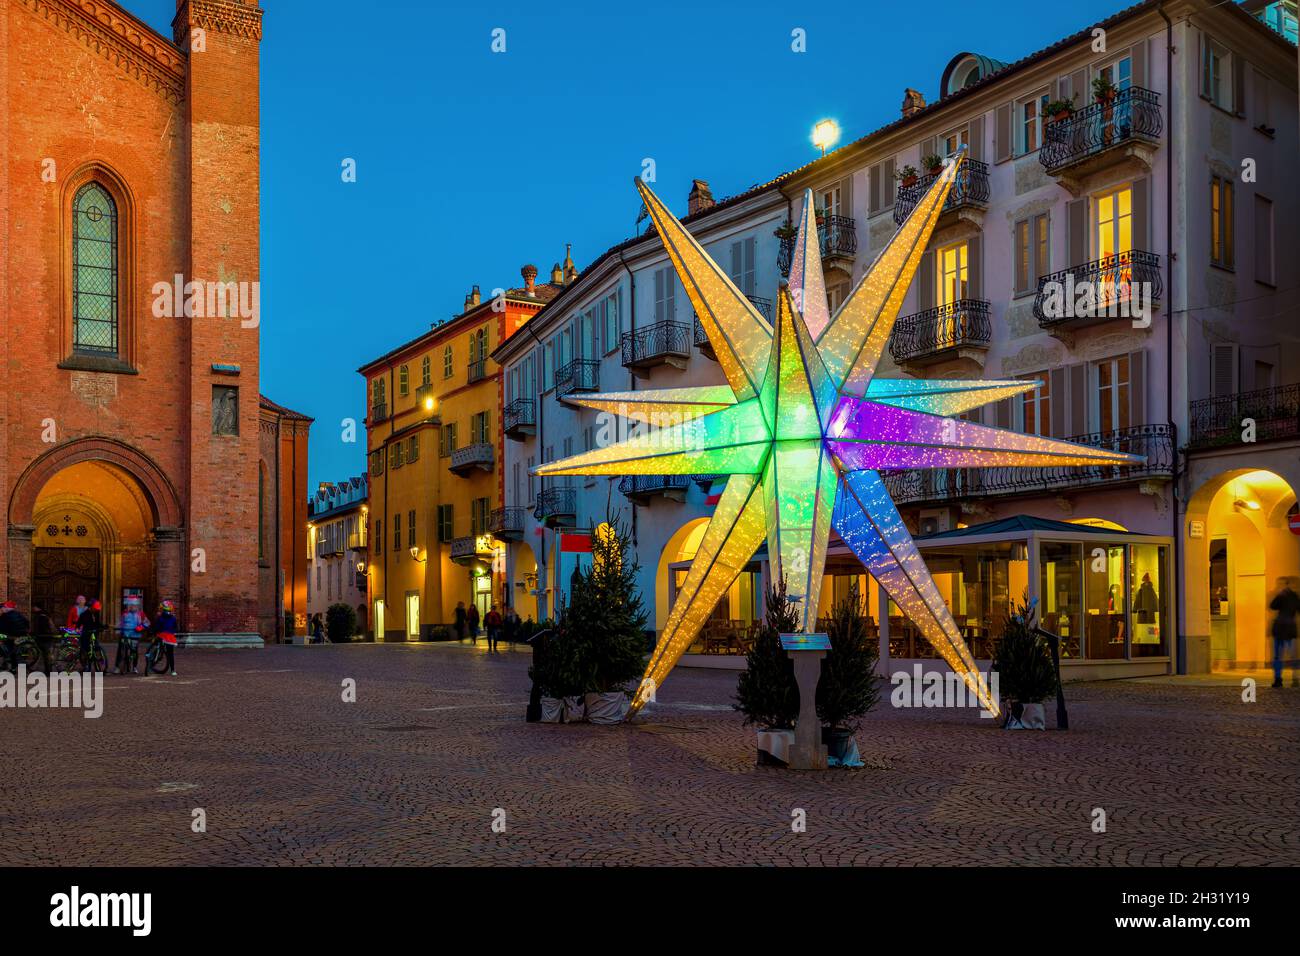 Illuminated colorful Christmas star on old town square in Alba, Piedmont, Northern Italy. Stock Photo